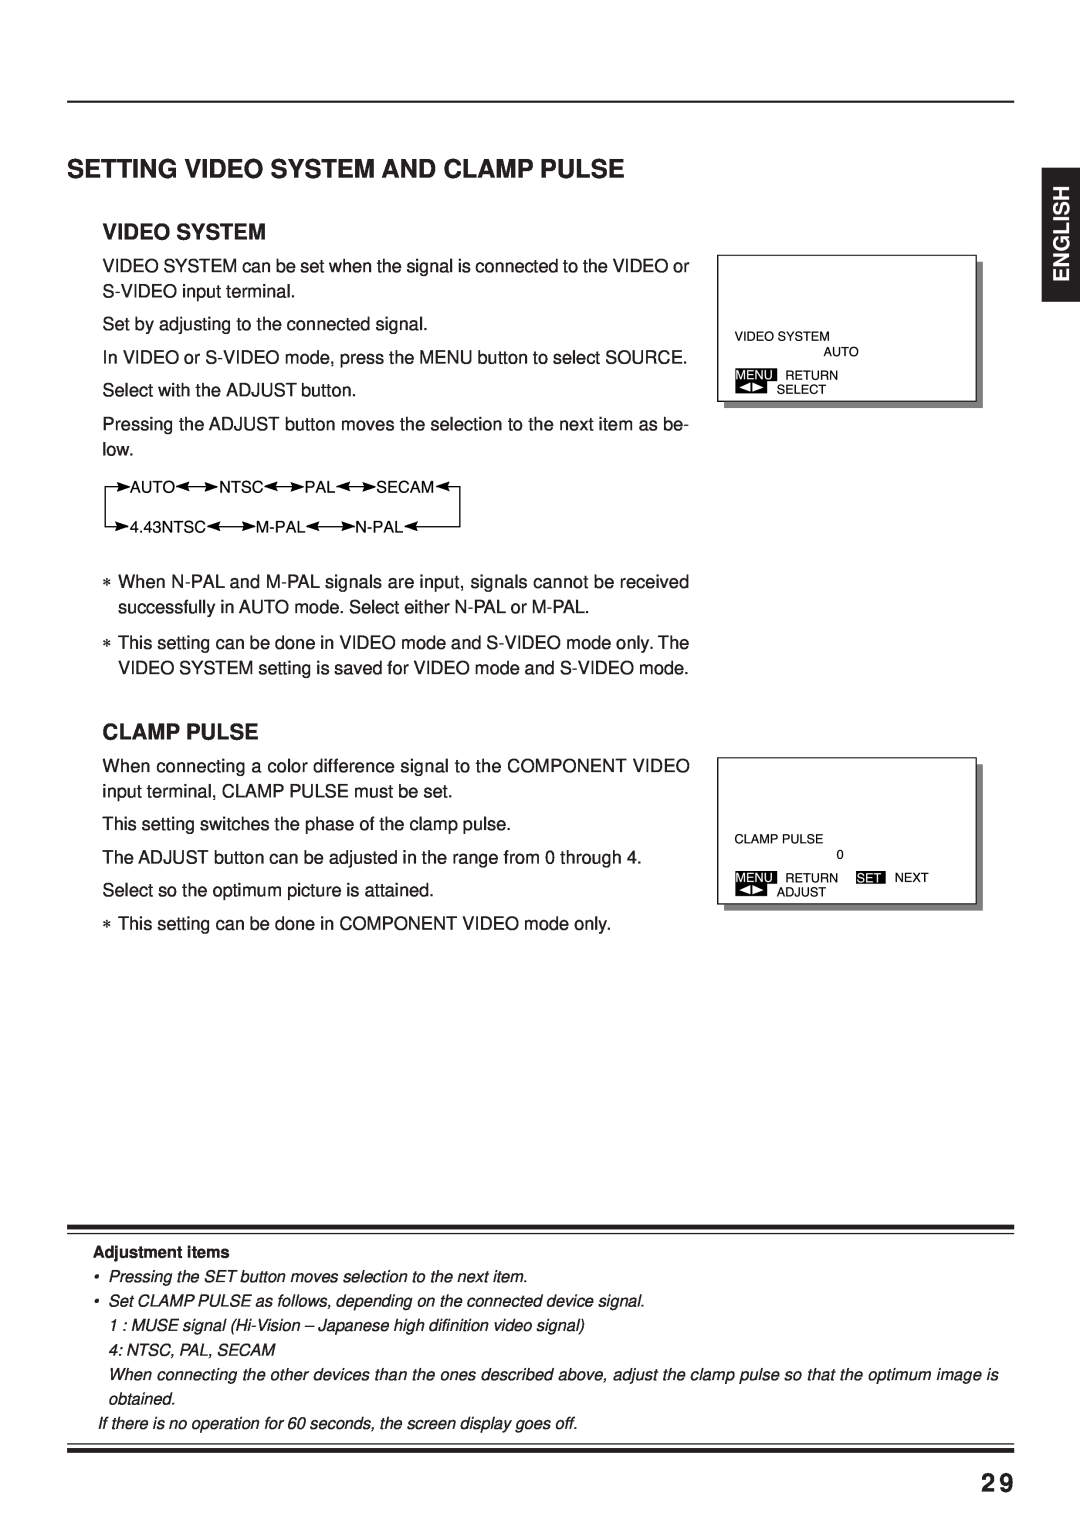 Fujitsu PDS4203W-H / PDS4203E-H user manual Setting Video System And Clamp Pulse, English 